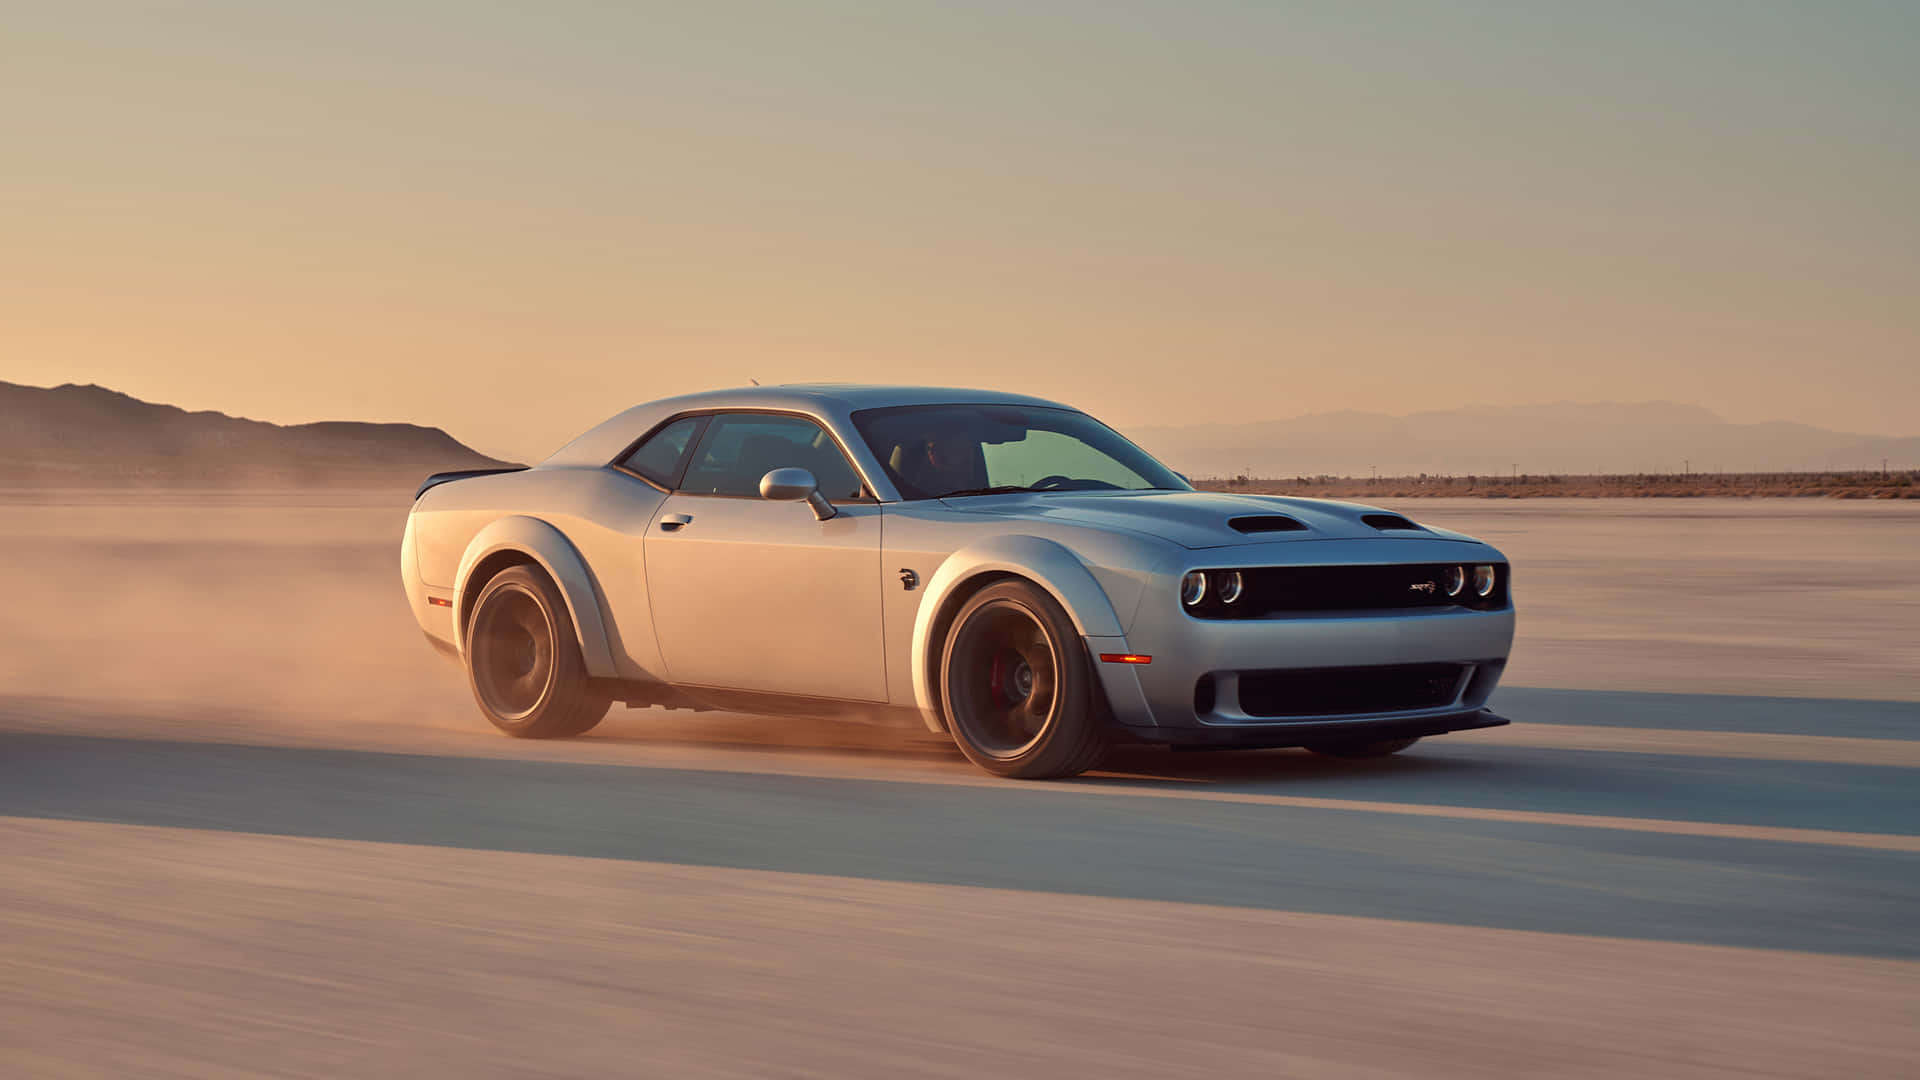 Powerful and Stylish: The Dodge Hellcat Wallpaper